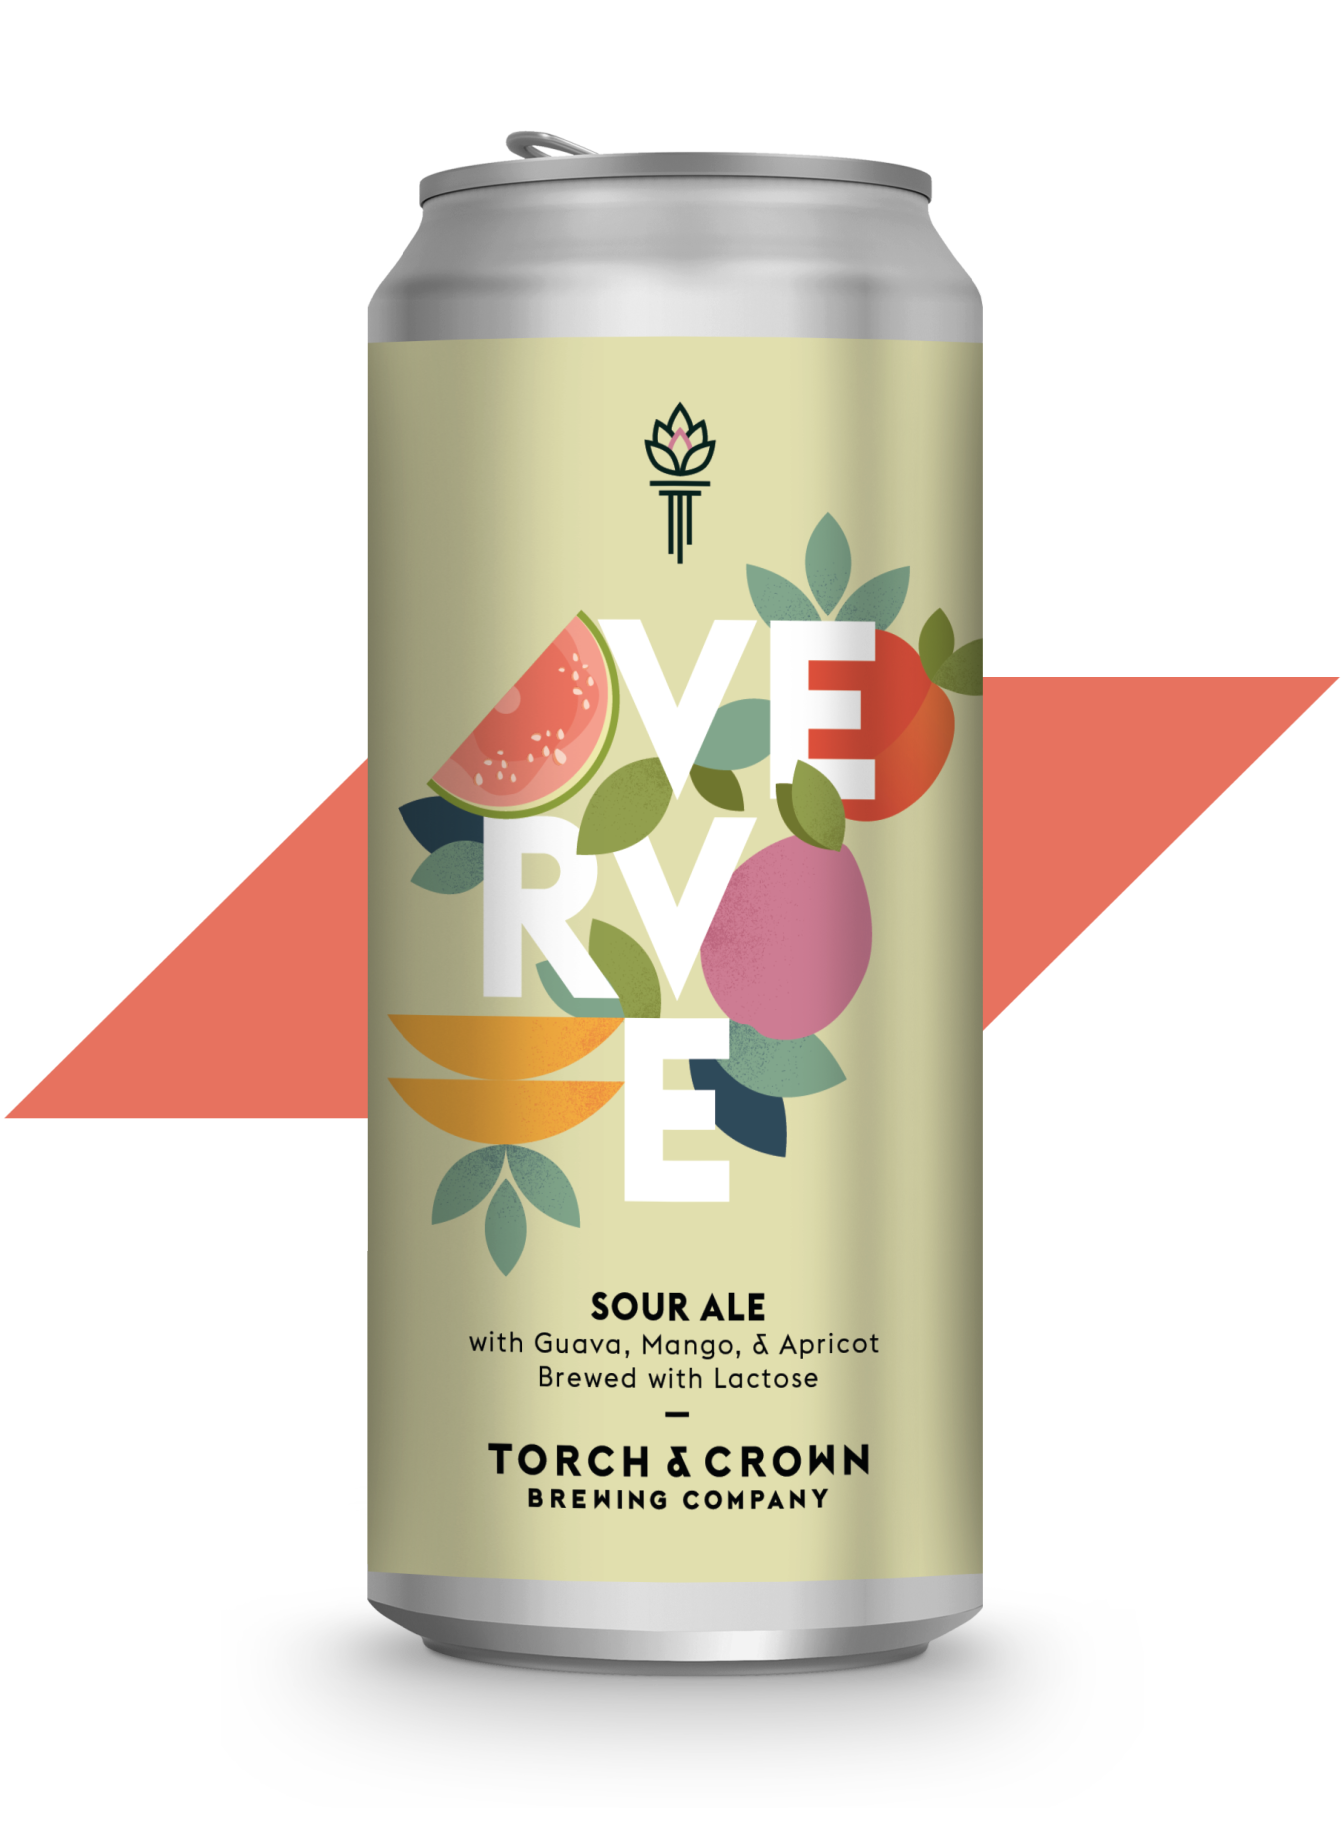 Verve Beer | Torch & Crown Brewing Company